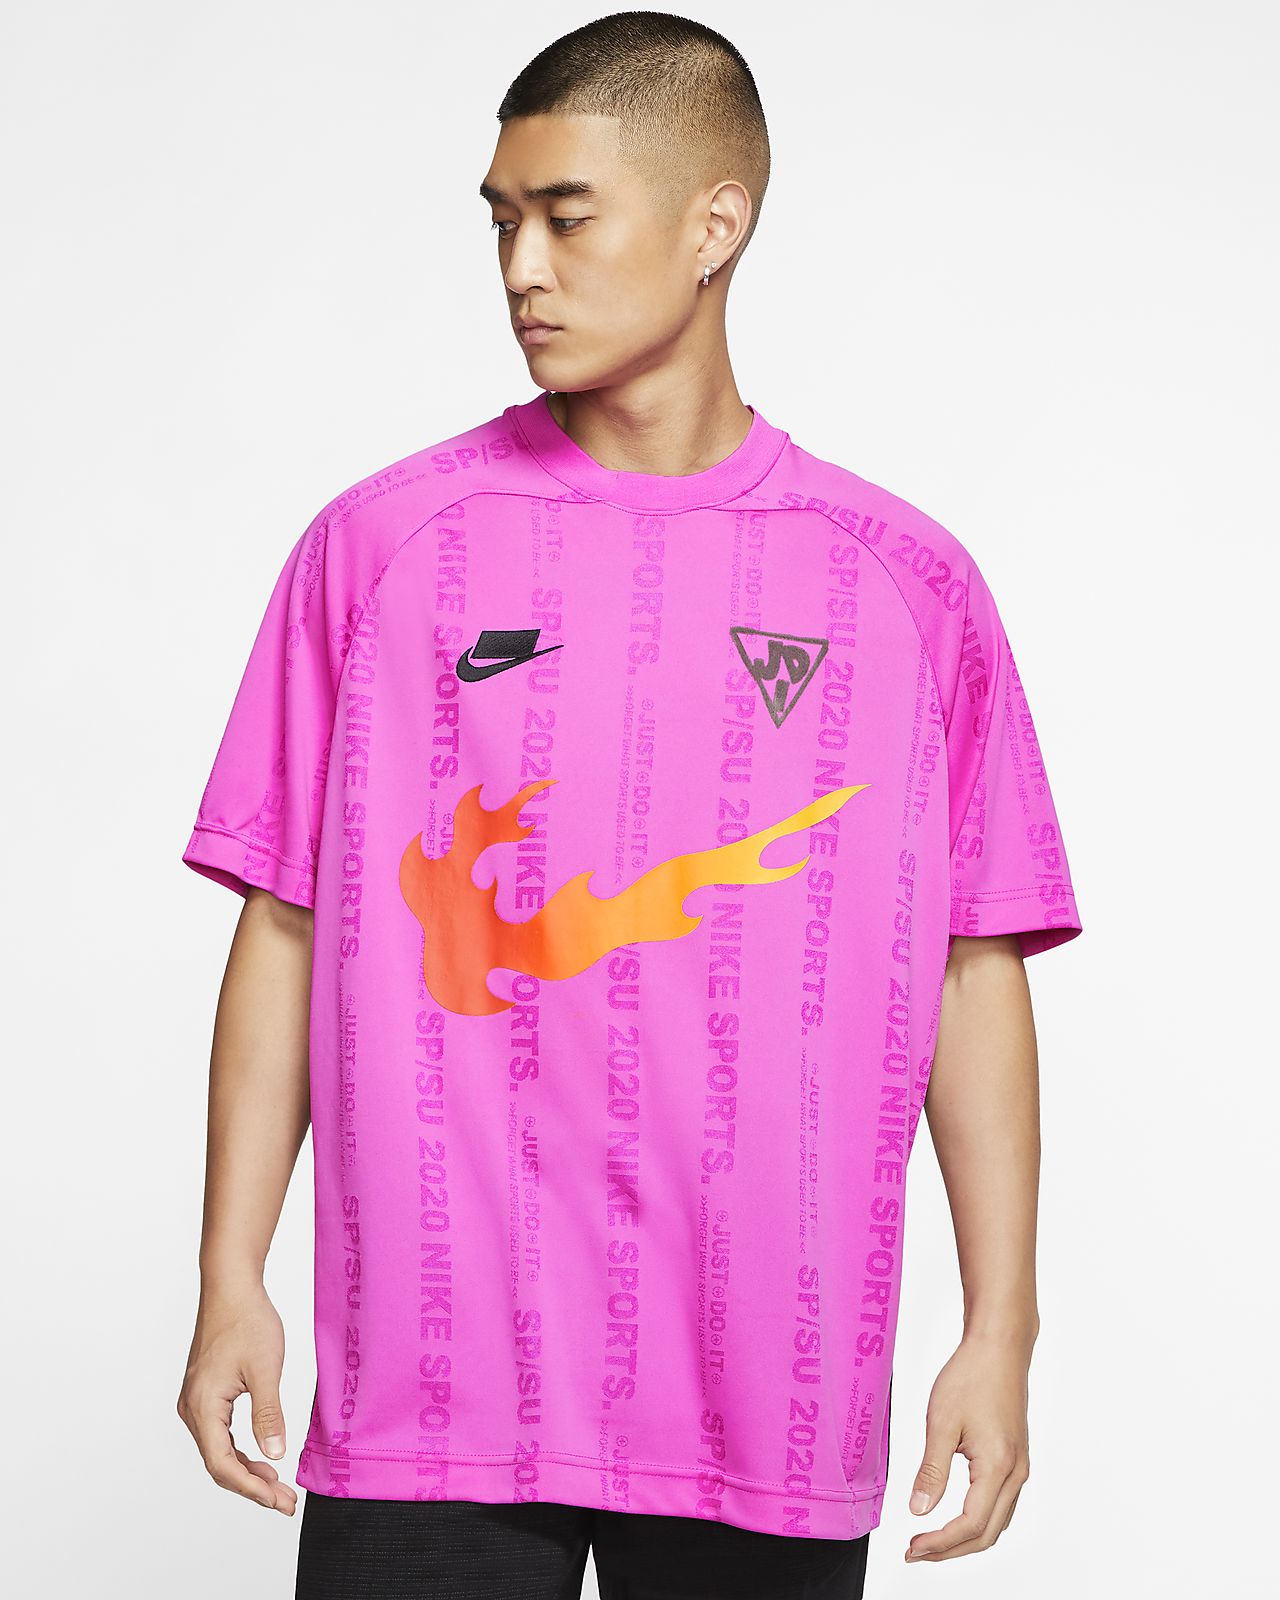 nike graphic tees clearance Sale,up to 